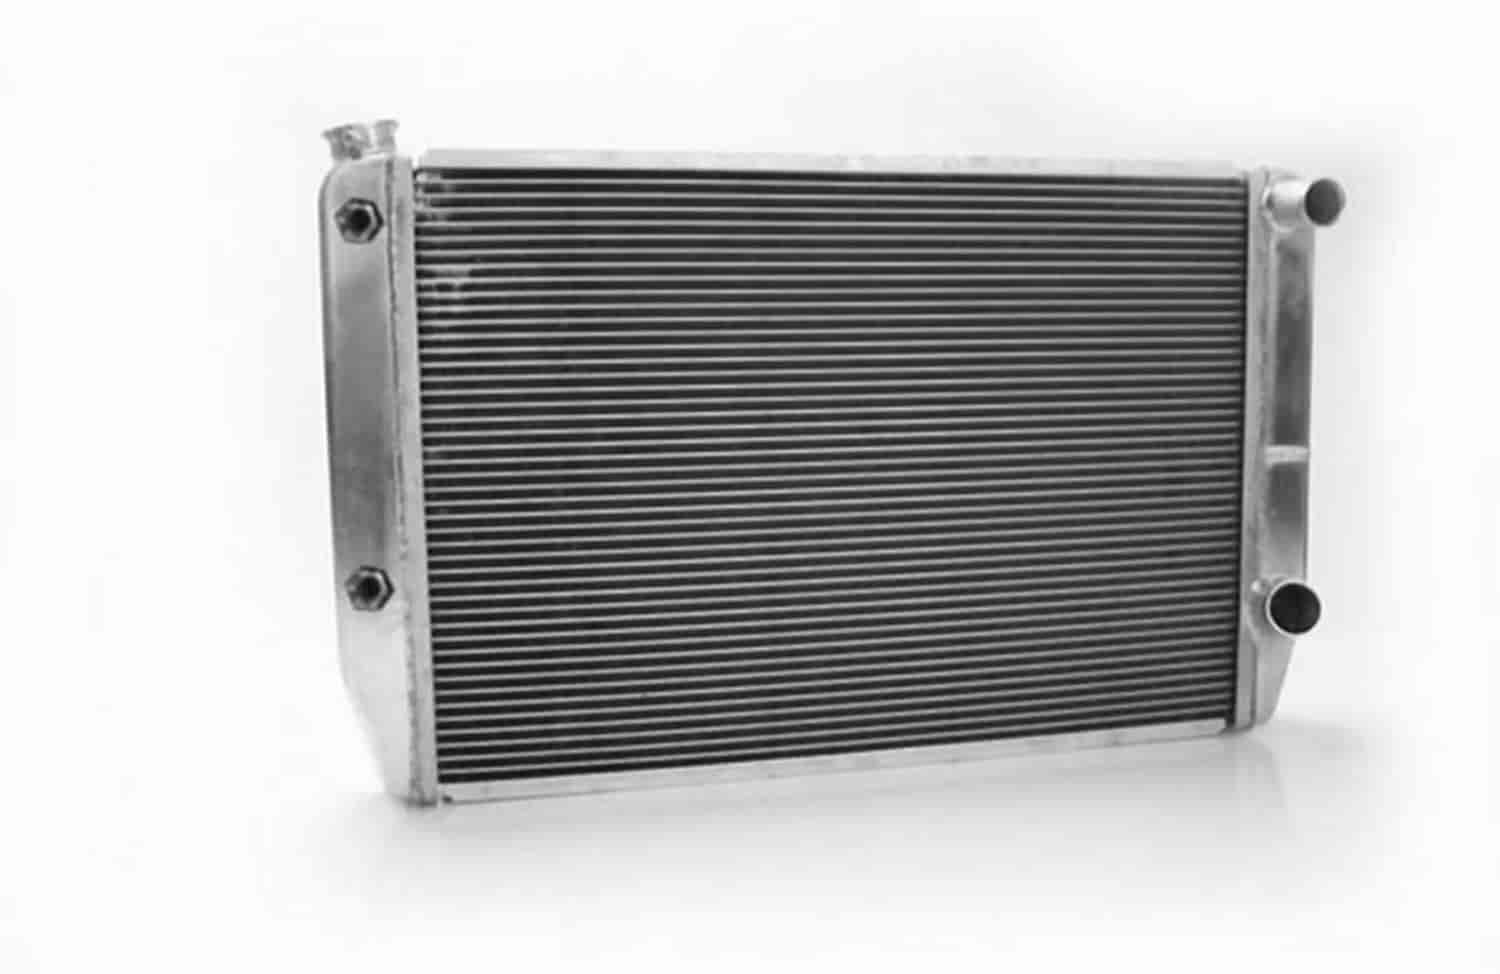 ClassicCool Universal Fit Radiator Dual Pass Crossflow Design 31" x 19" with Transmission Cooler